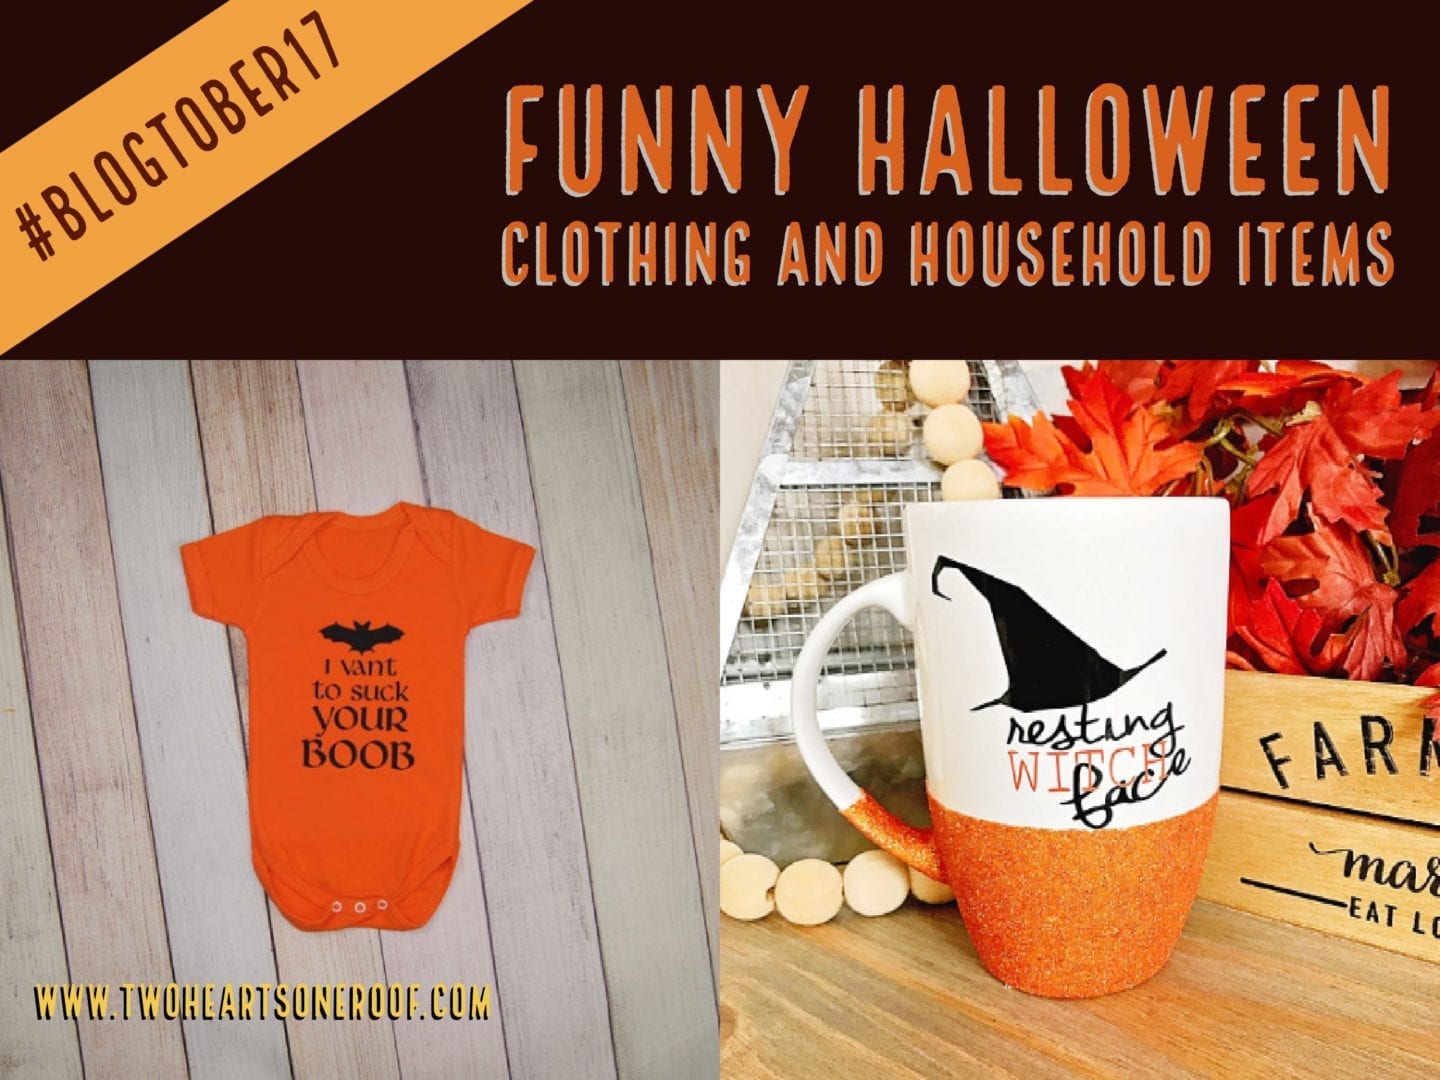 Funny Halloween Clothing and Household Items – Blogtober 17